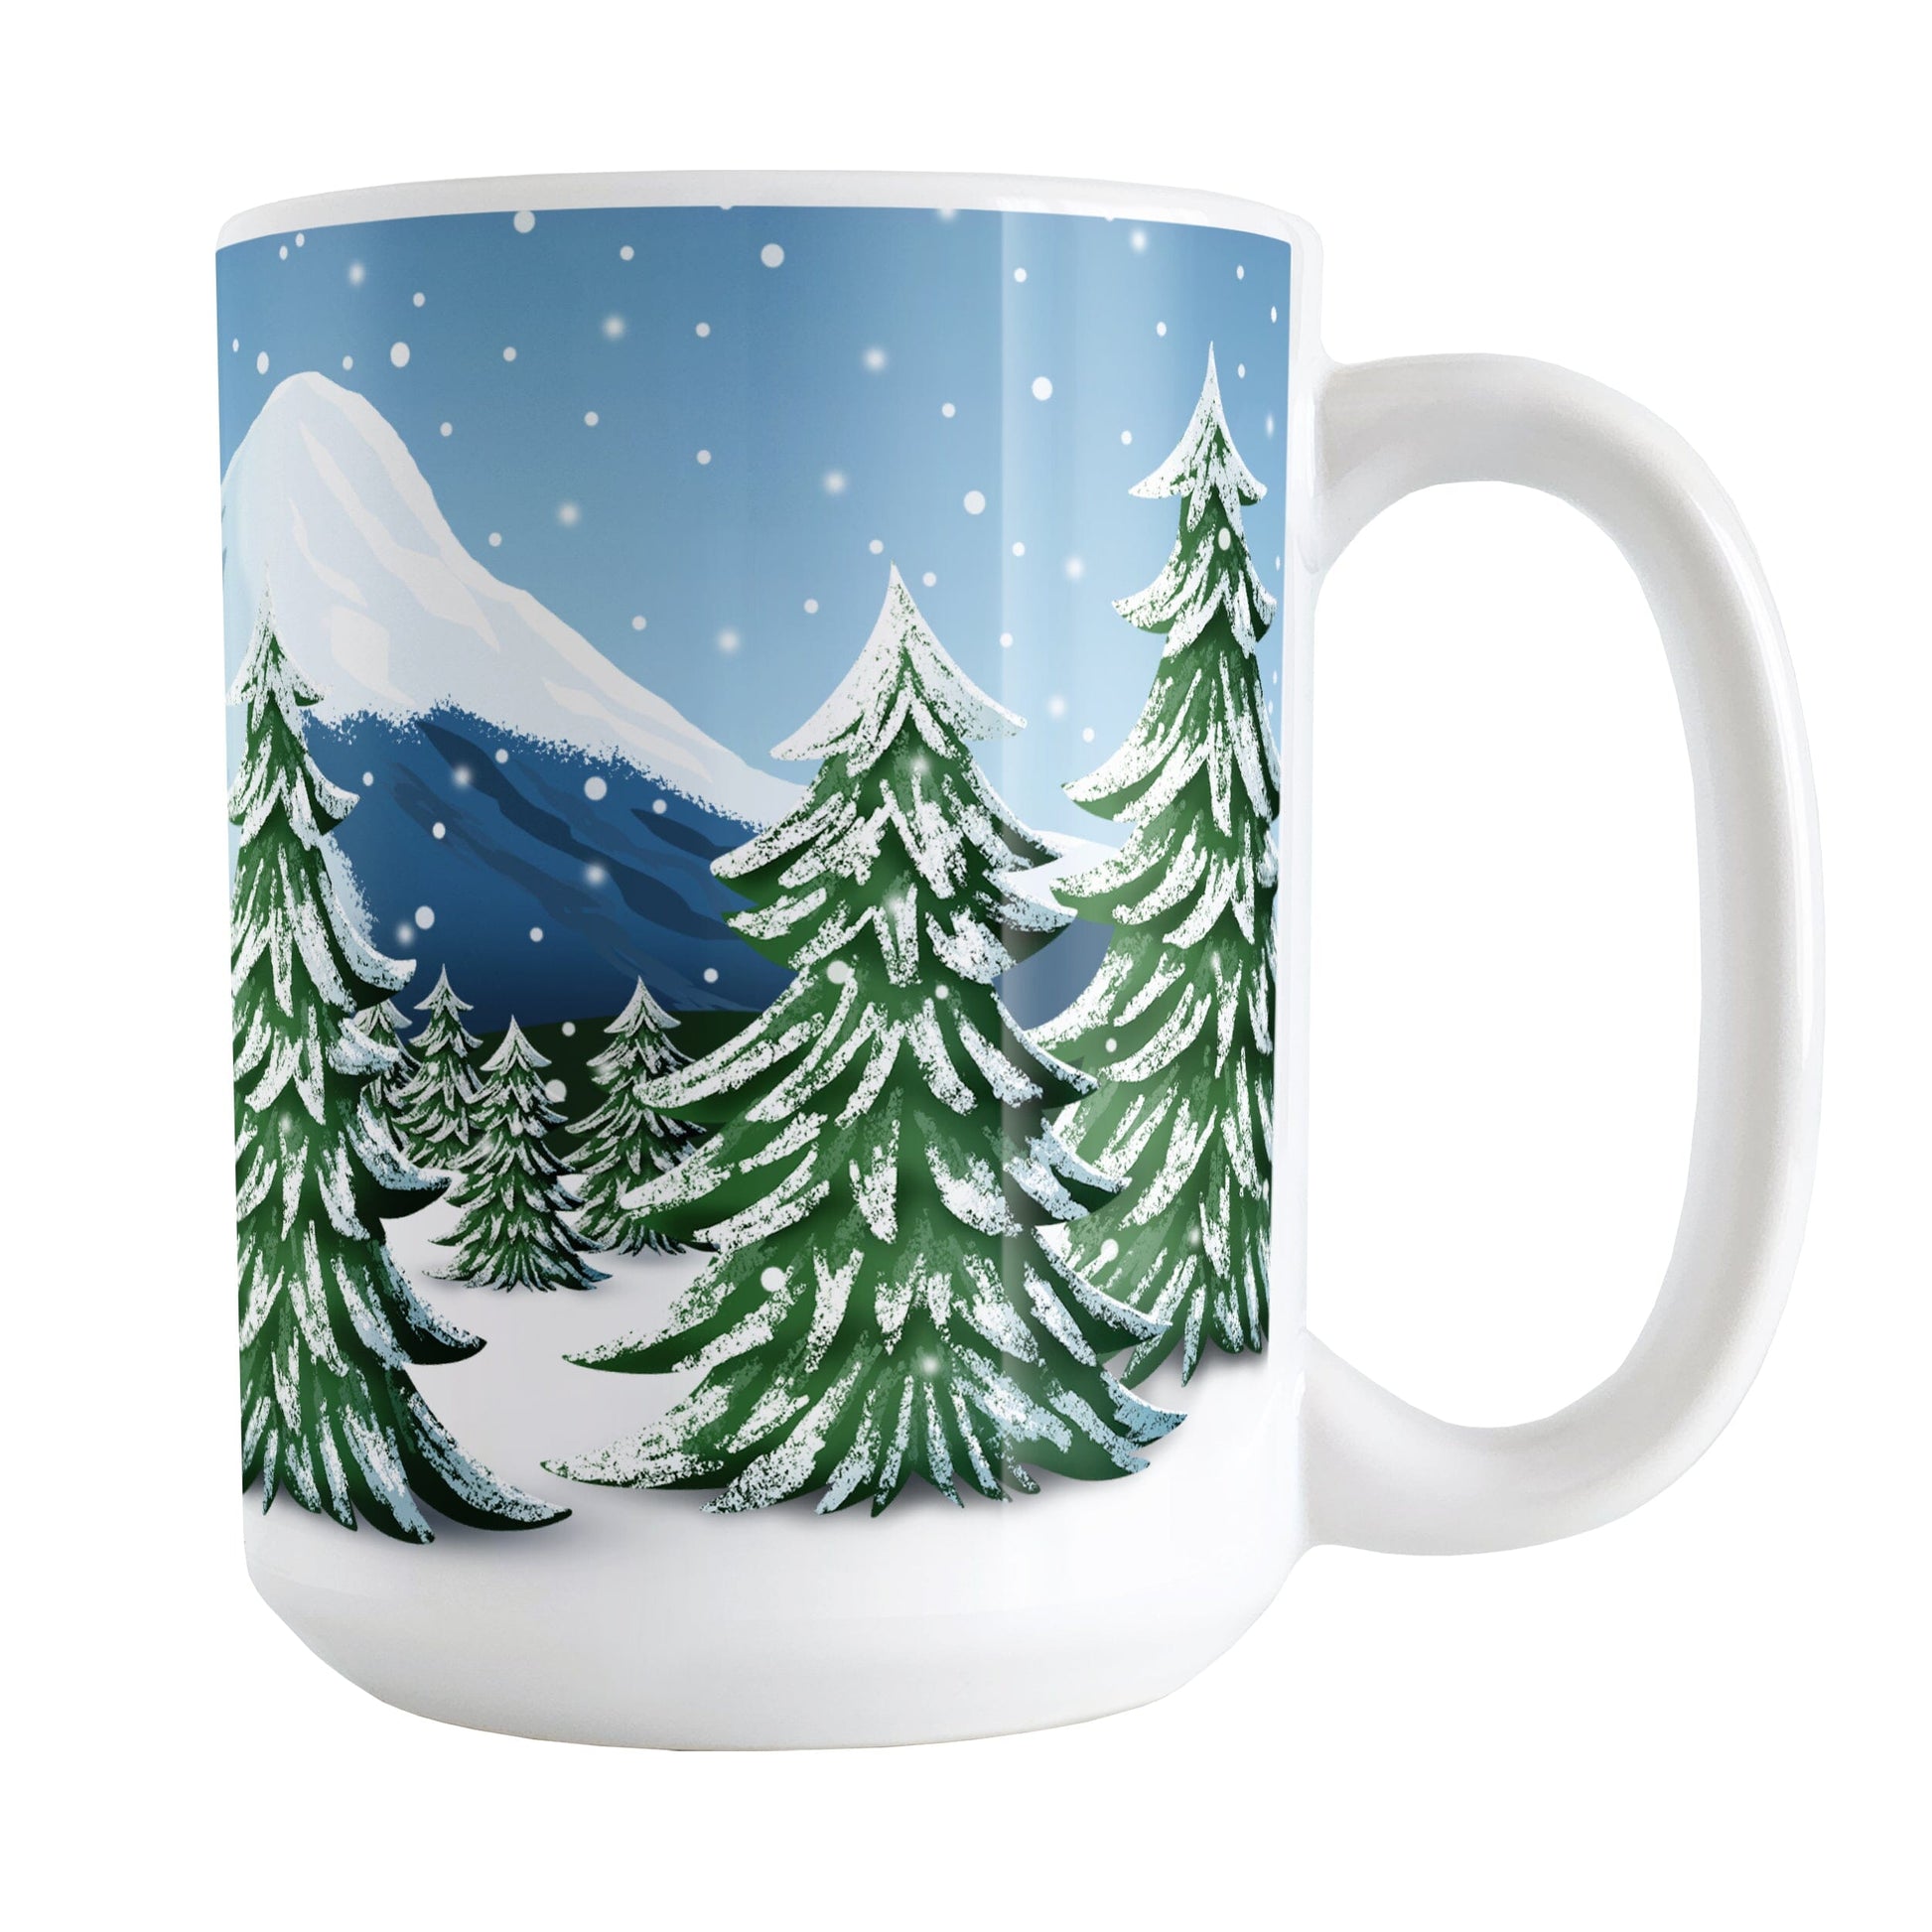 Outdoors Winter Trees Scene Mug (15oz) at Amy's Coffee Mugs. A ceramic coffee mug designed with a beautiful winter scene illustrated with snow-covered pine trees, snowy mountains, and a snowing winter sky. 